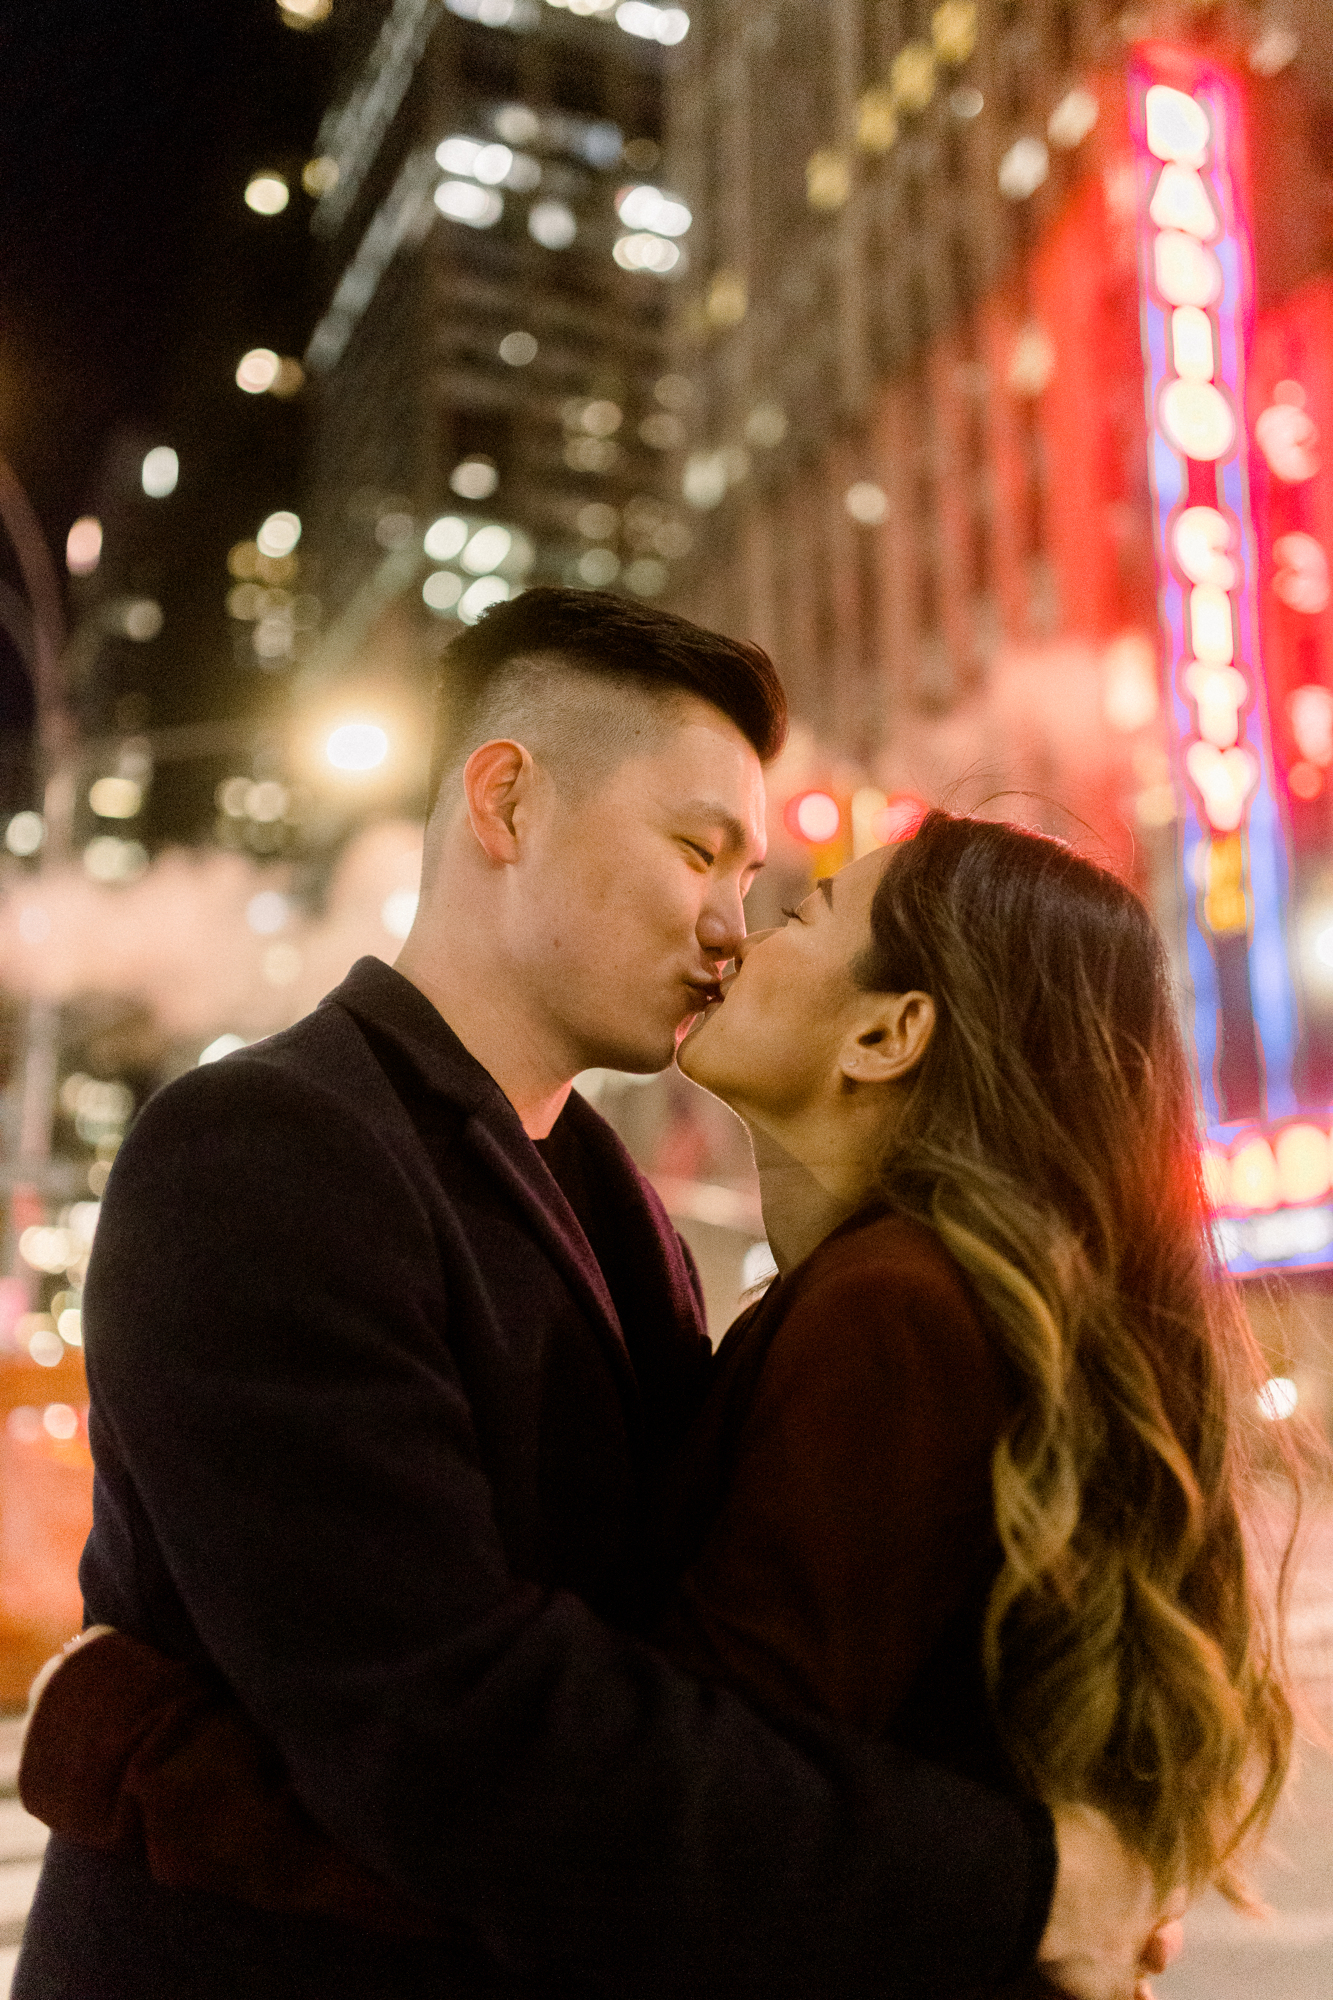 Idyllic Nighttime Winter Engagement Photos in New York's Iconic Times Square